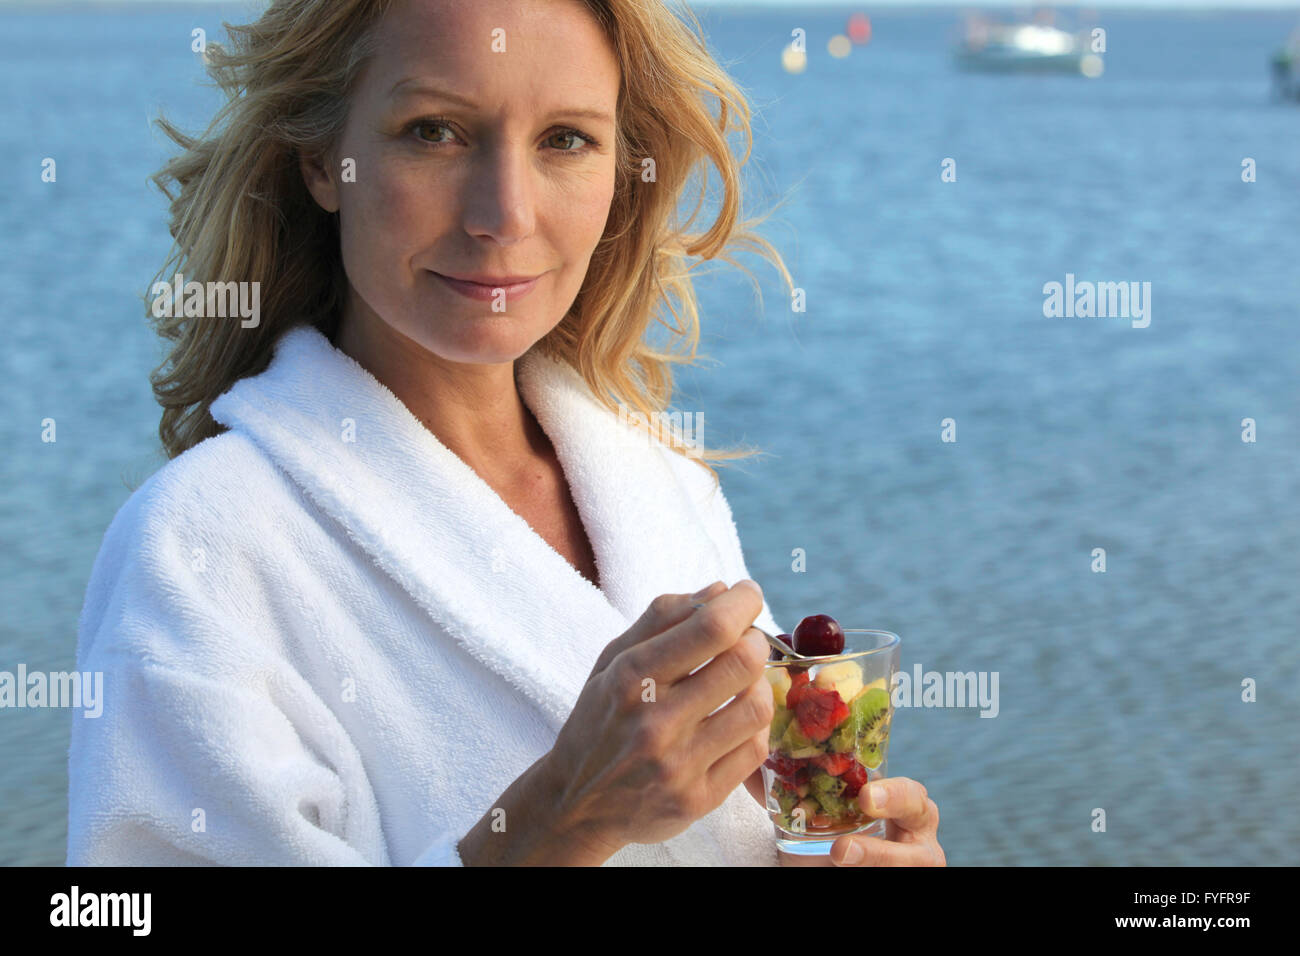 Smiling woman in peignoir eating fruit salad Banque D'Images